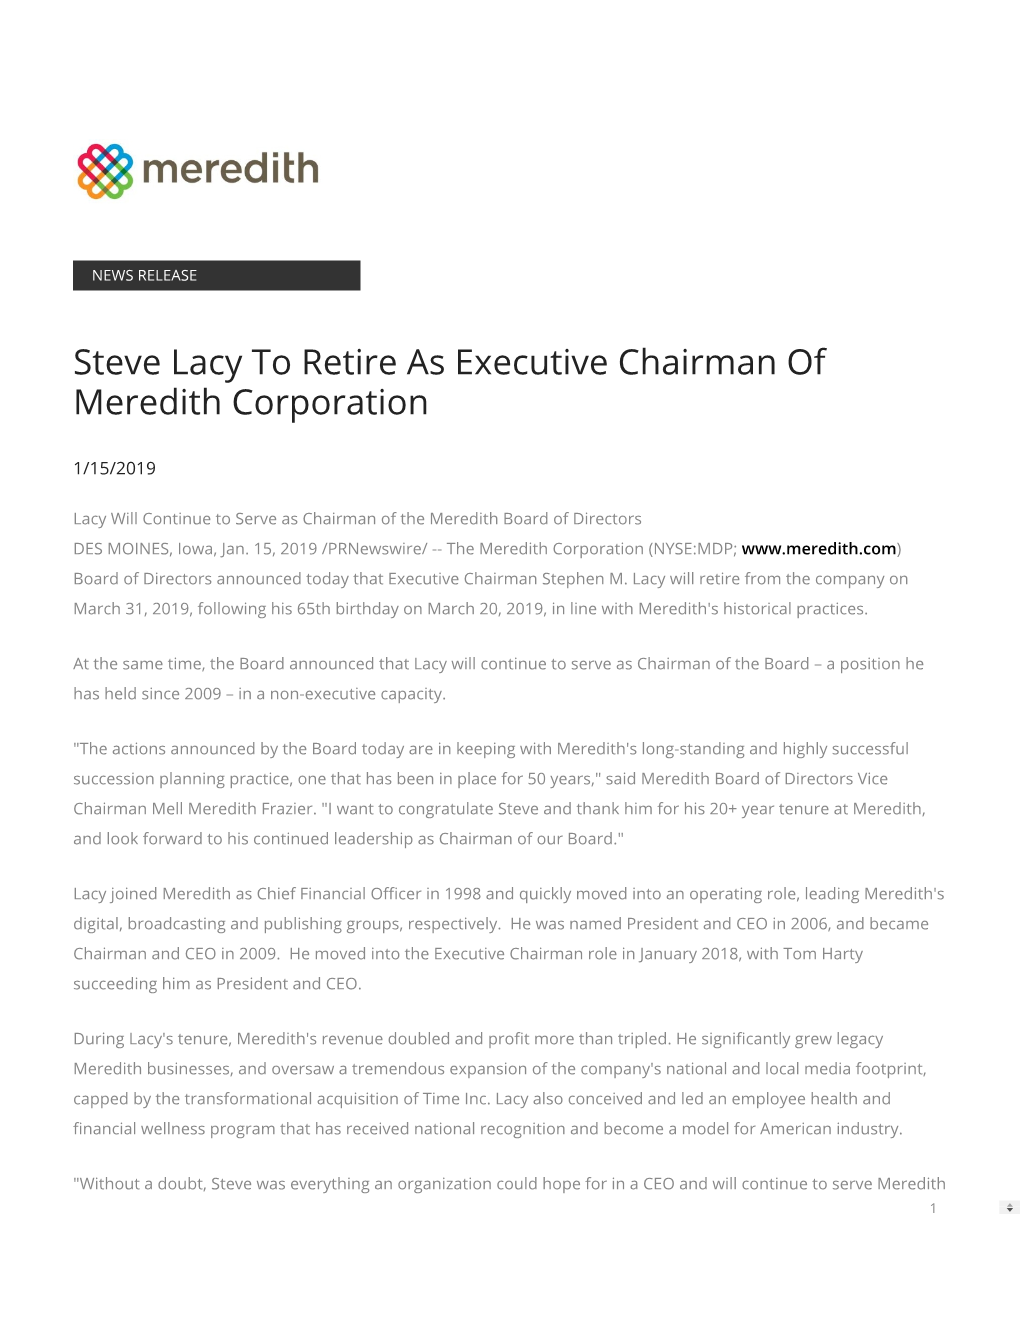 Steve Lacy to Retire As Executive Chairman of Meredith Corporation